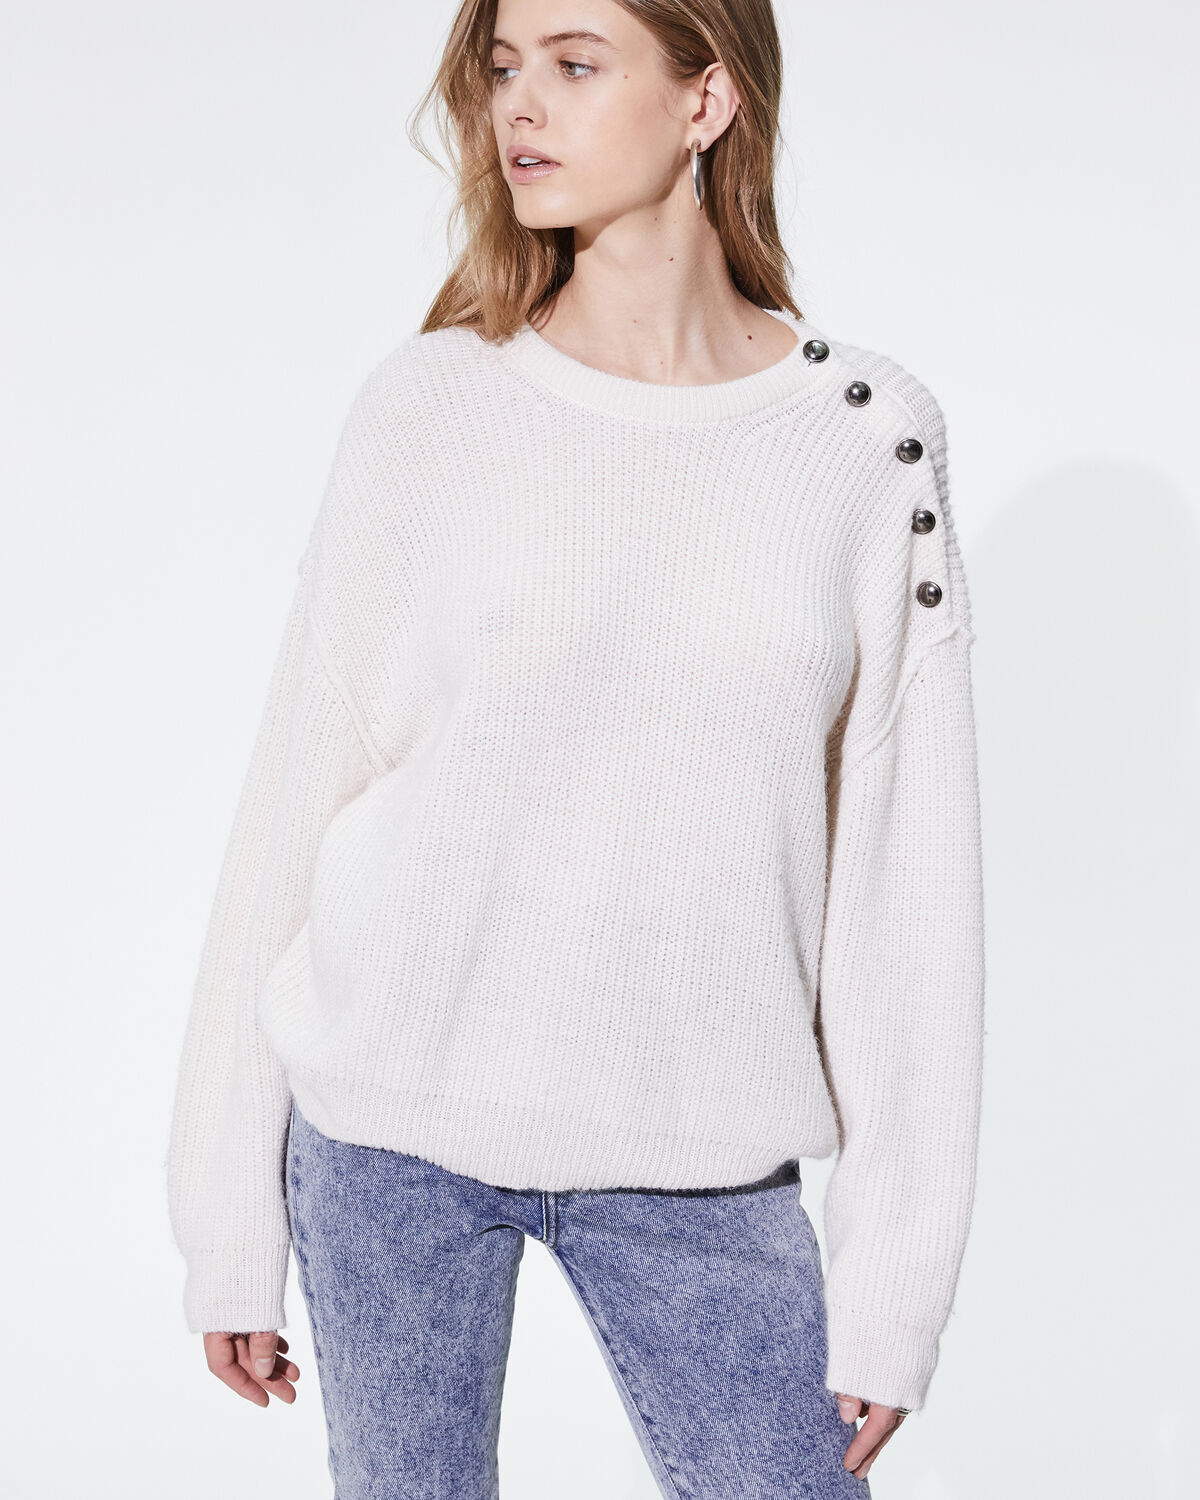 Photo of IRO Paris Holmes Sweater Ecru - Made From Alpaca And Wool, This Sweater Will Keep You Warm In Winter. Its Plus? Its Buttons Applied To The Shoulder That Will Add Contrast To Your Outfits. Fall Winter 19